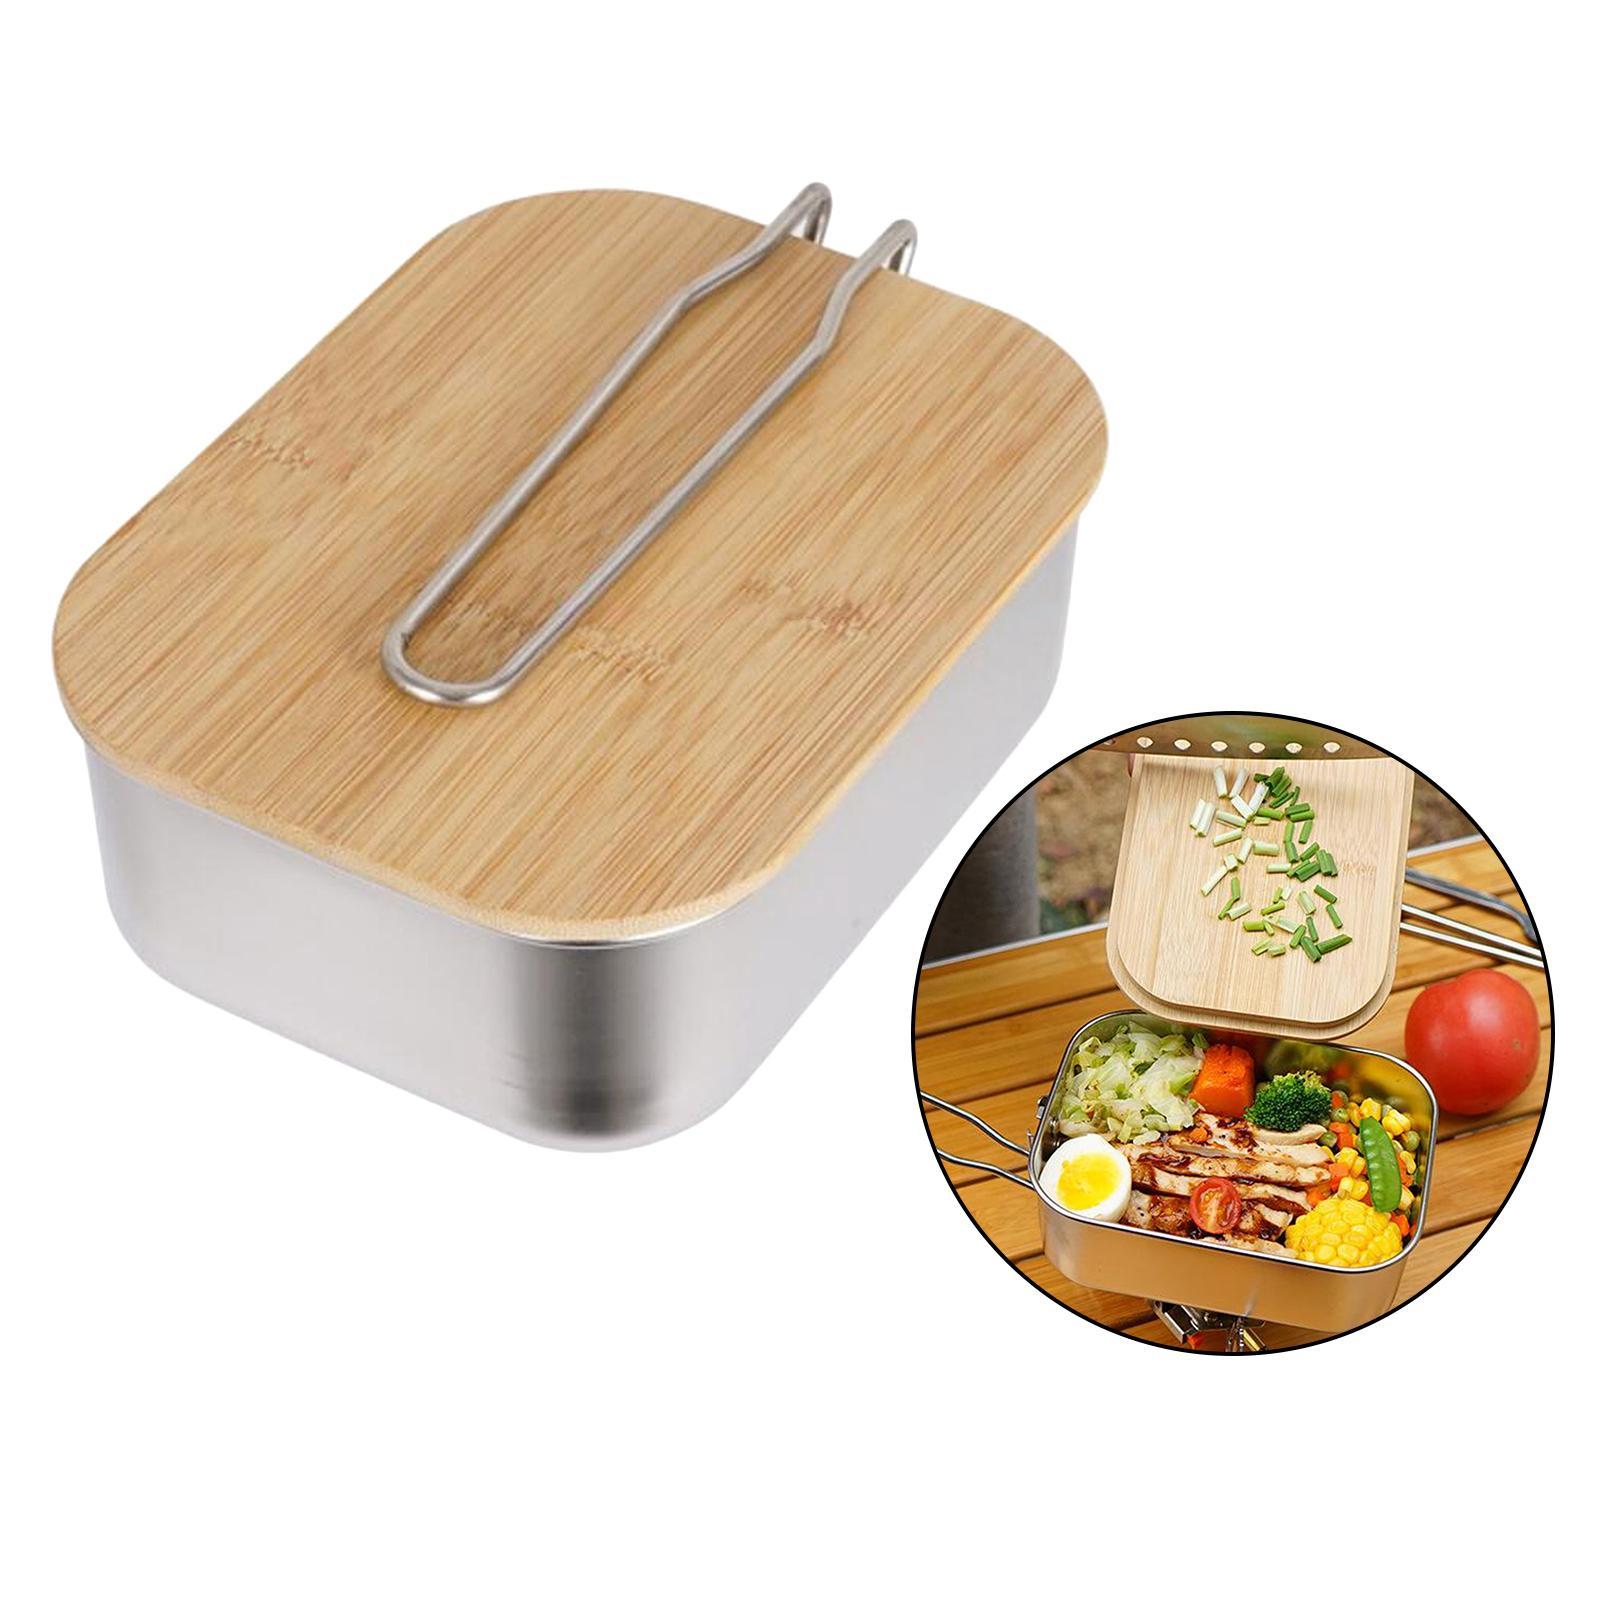 Bento Box Bamboo Lids Bento Box Lunch Box for Adults Kids, Leak-Proof Stainless Steel Bento Box Easy Wash for Outdoor Camping Travel